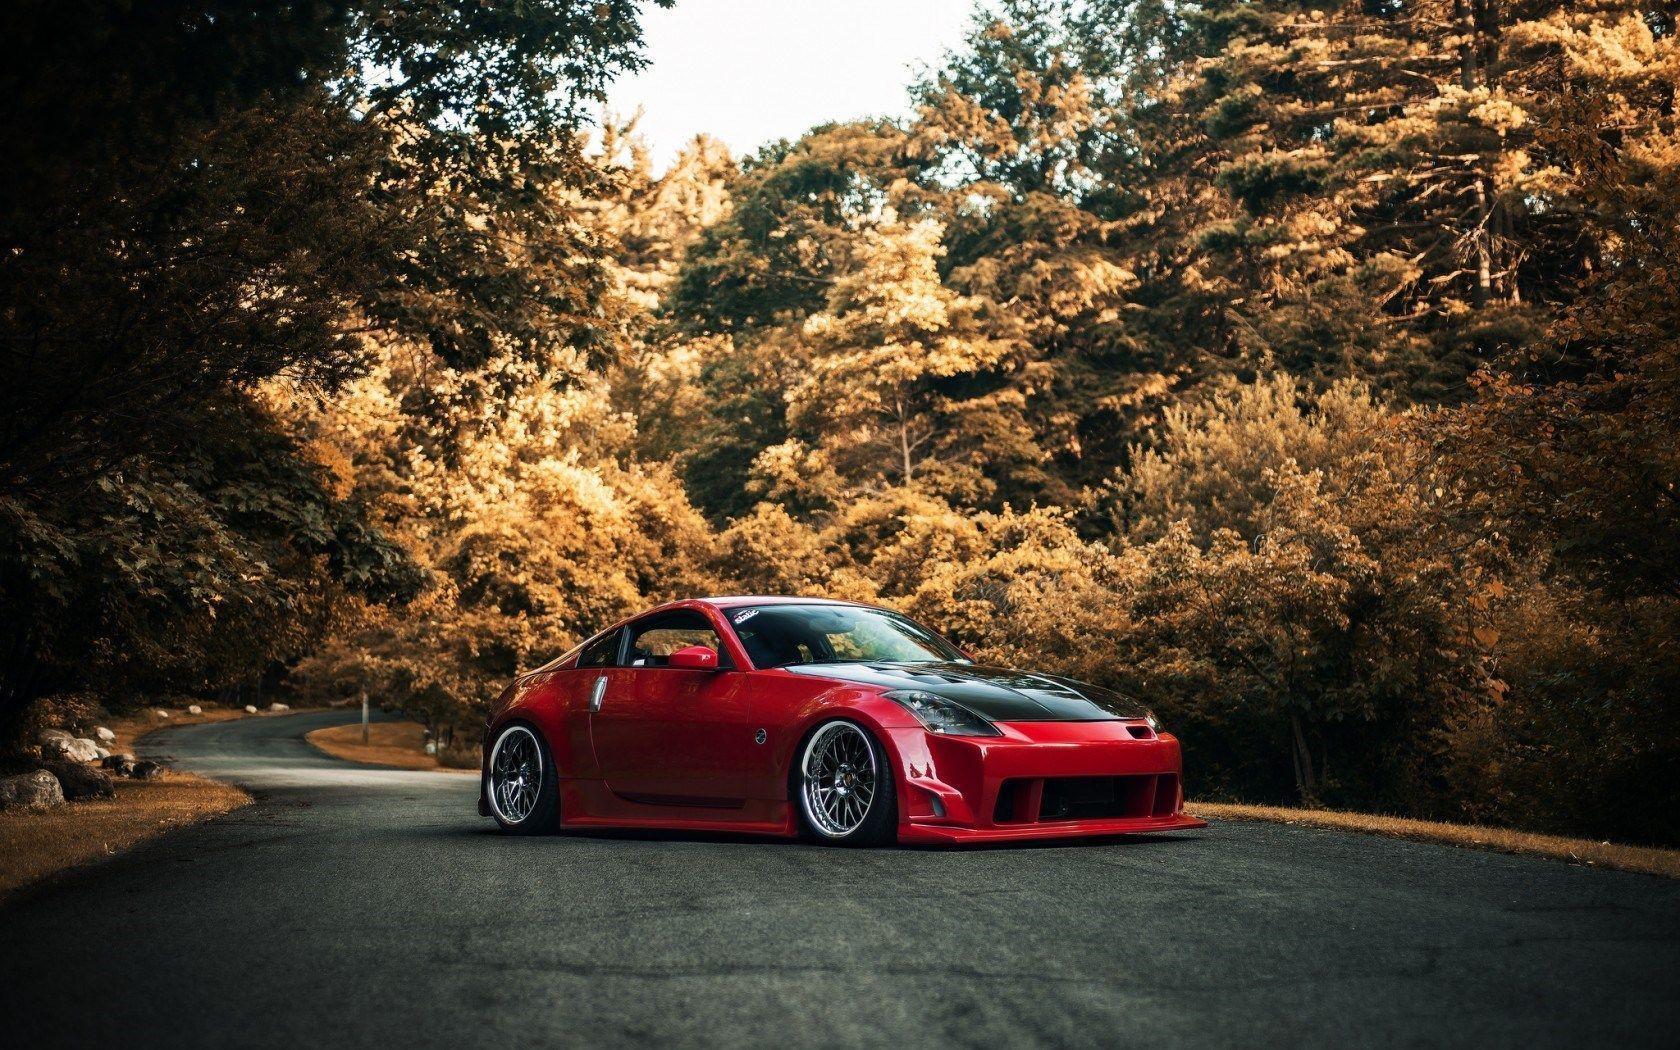 Red Nissan 350z Car Tuning Fall Forest Street HD Wallpaper